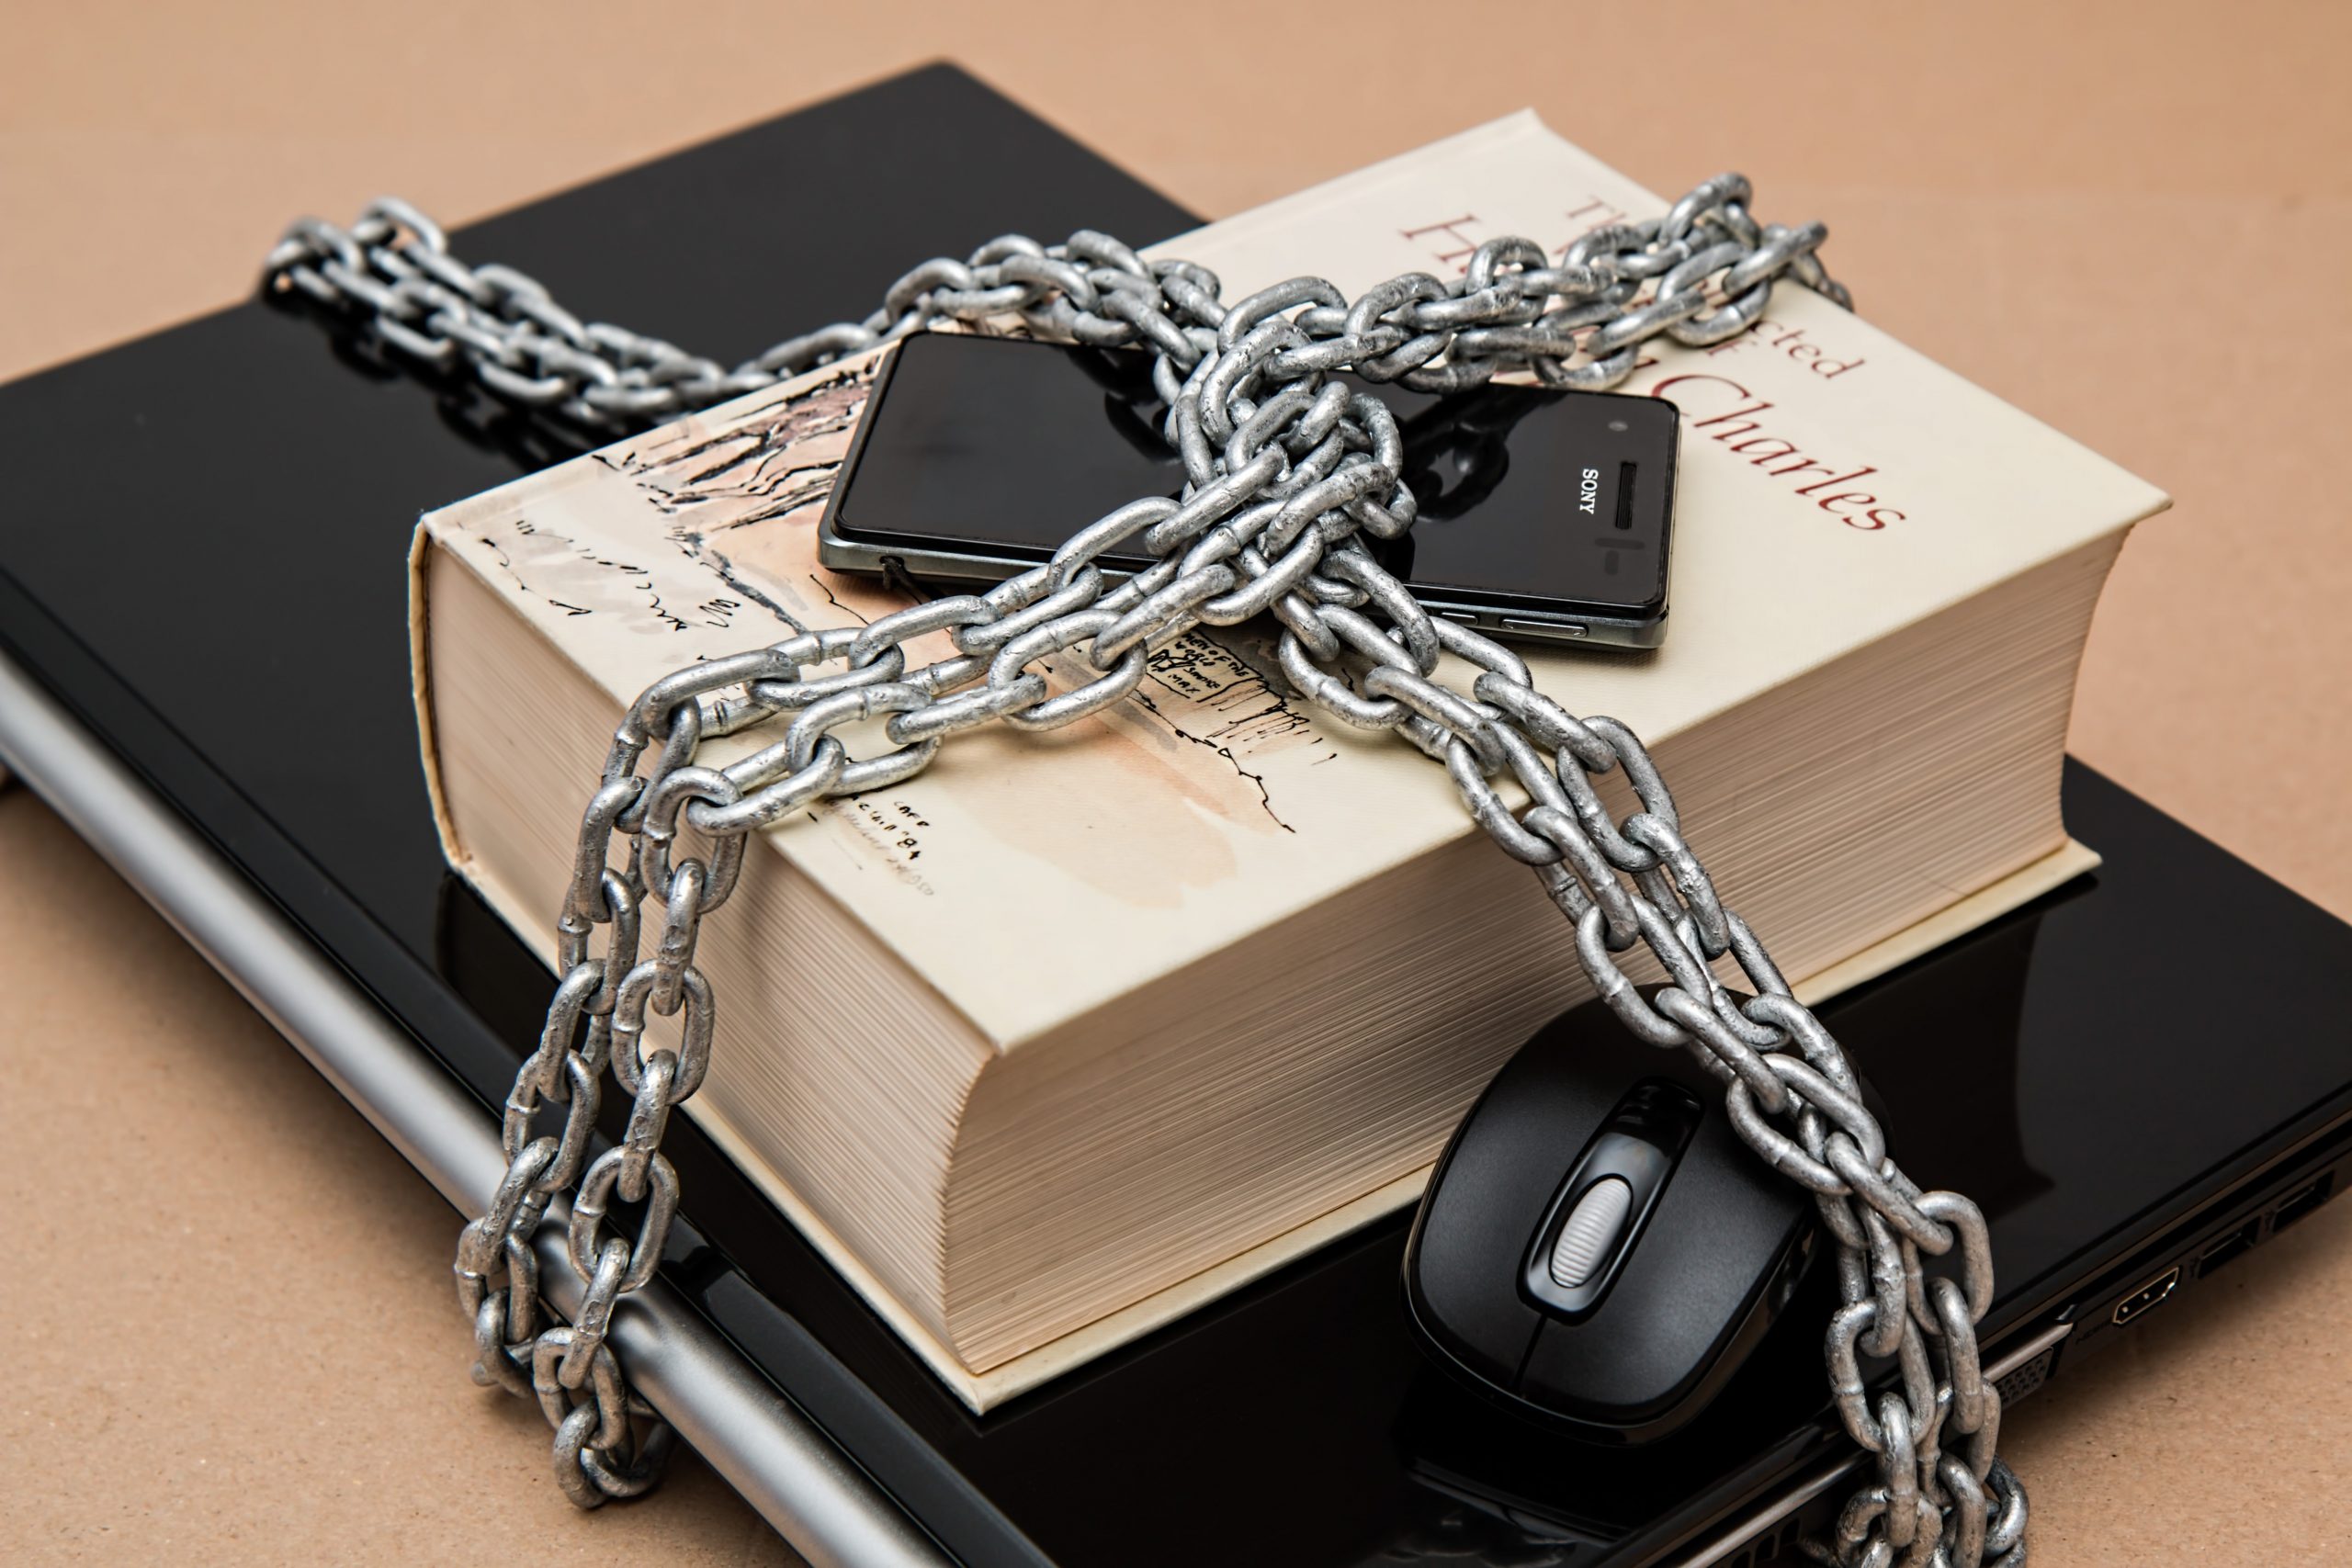 Security Strategies to Protect Digital Logsheets
Photo by Pixabay: https://www.pexels.com/photo/black-android-smartphone-on-top-of-white-book-39584/